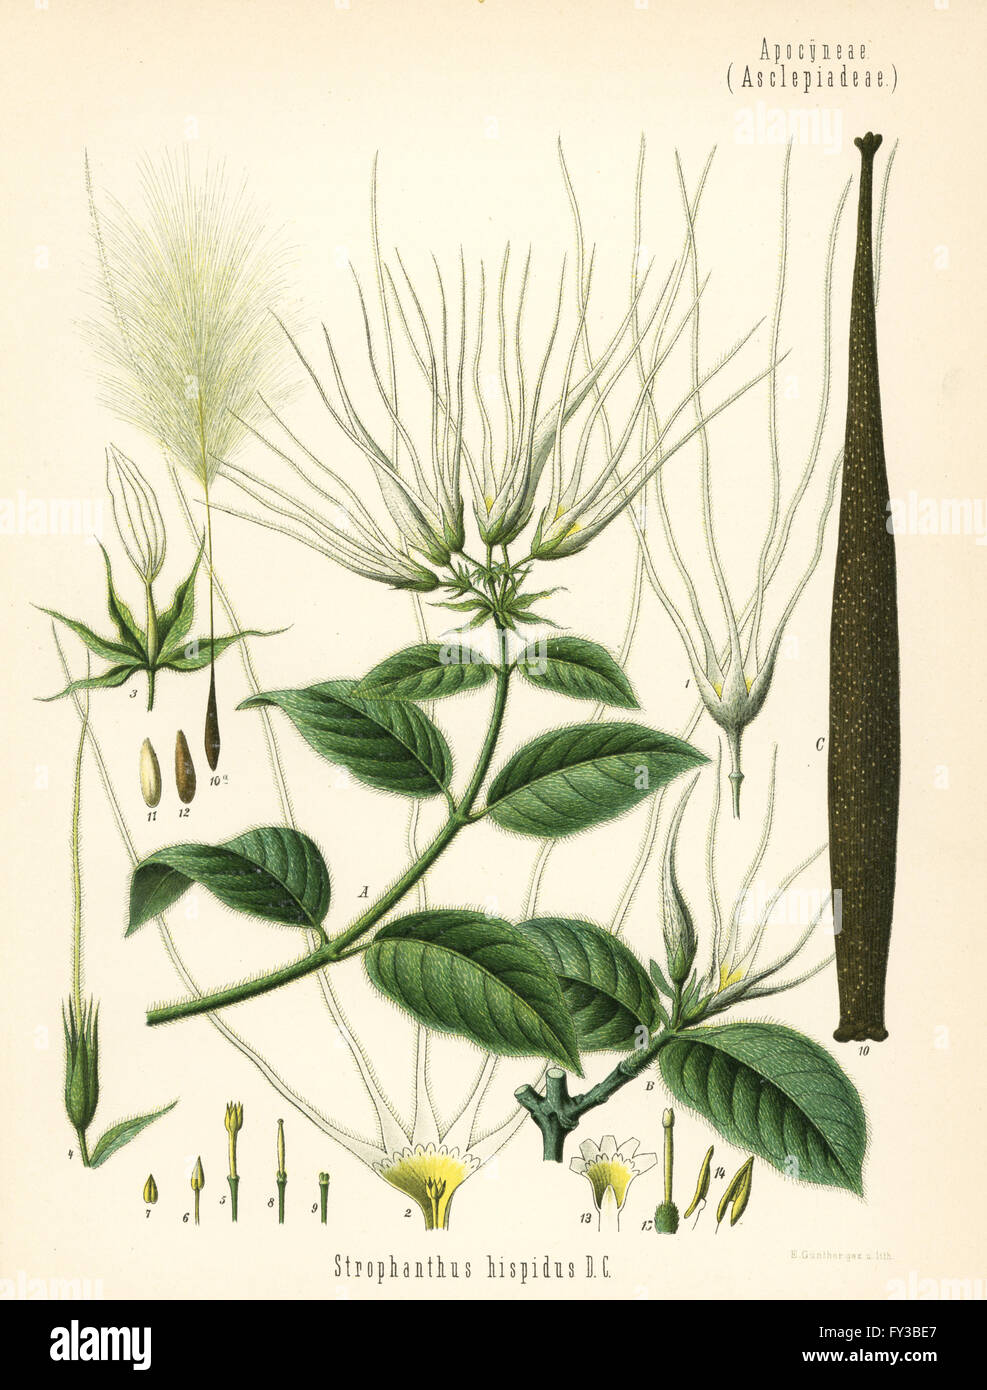 Strophanthus hispidus. Chromolithograph by E. Gunther after a botanical illustration from Hermann Adolph Koehler's Medicinal Plants, edited by Gustav Pabst, Koehler, Germany, 1887. Stock Photo